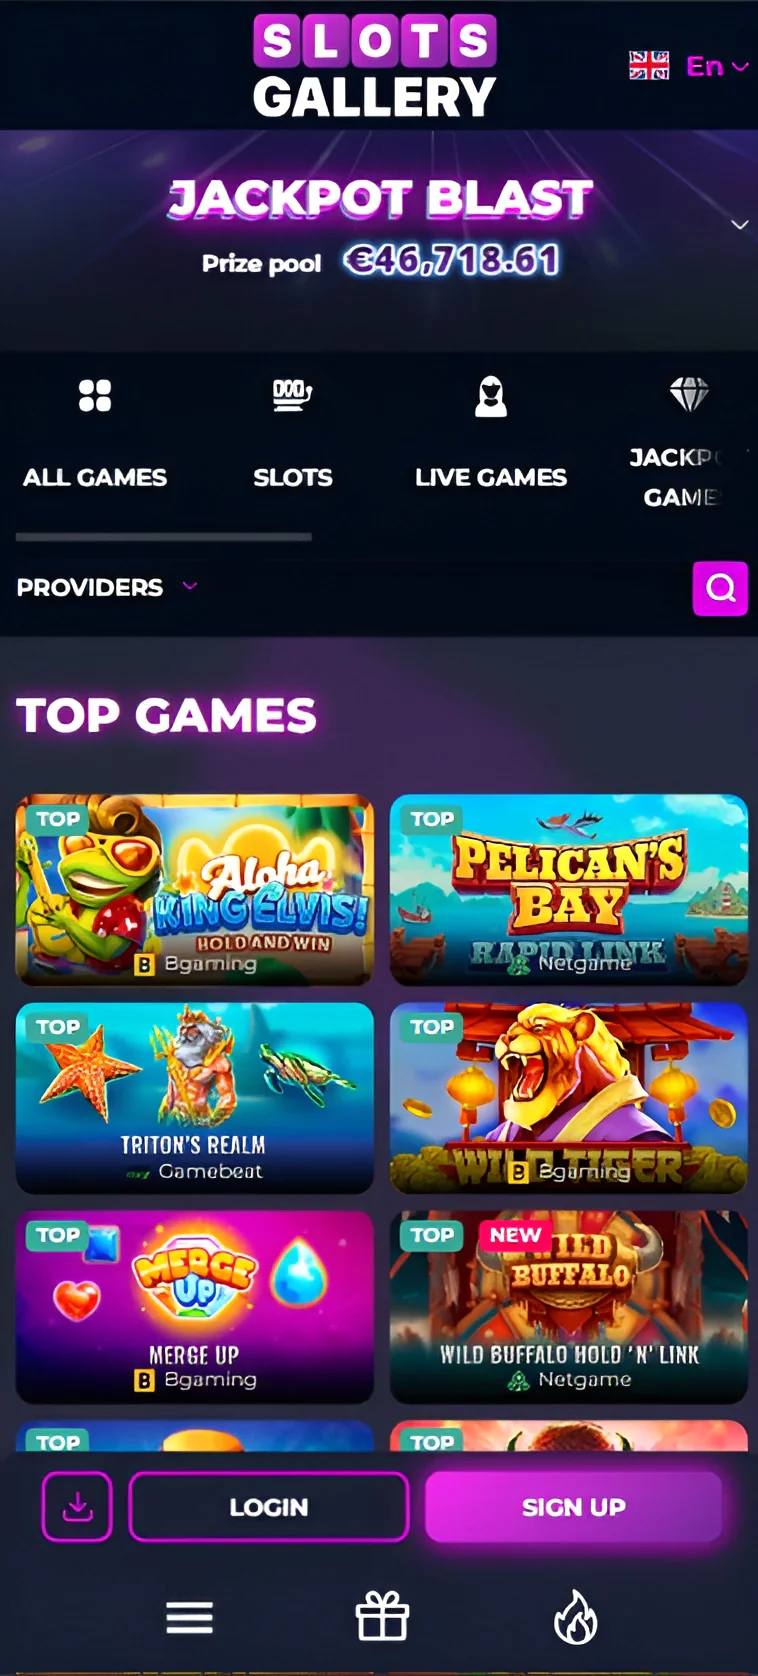 Slots library for Slots Gallery Mobile players